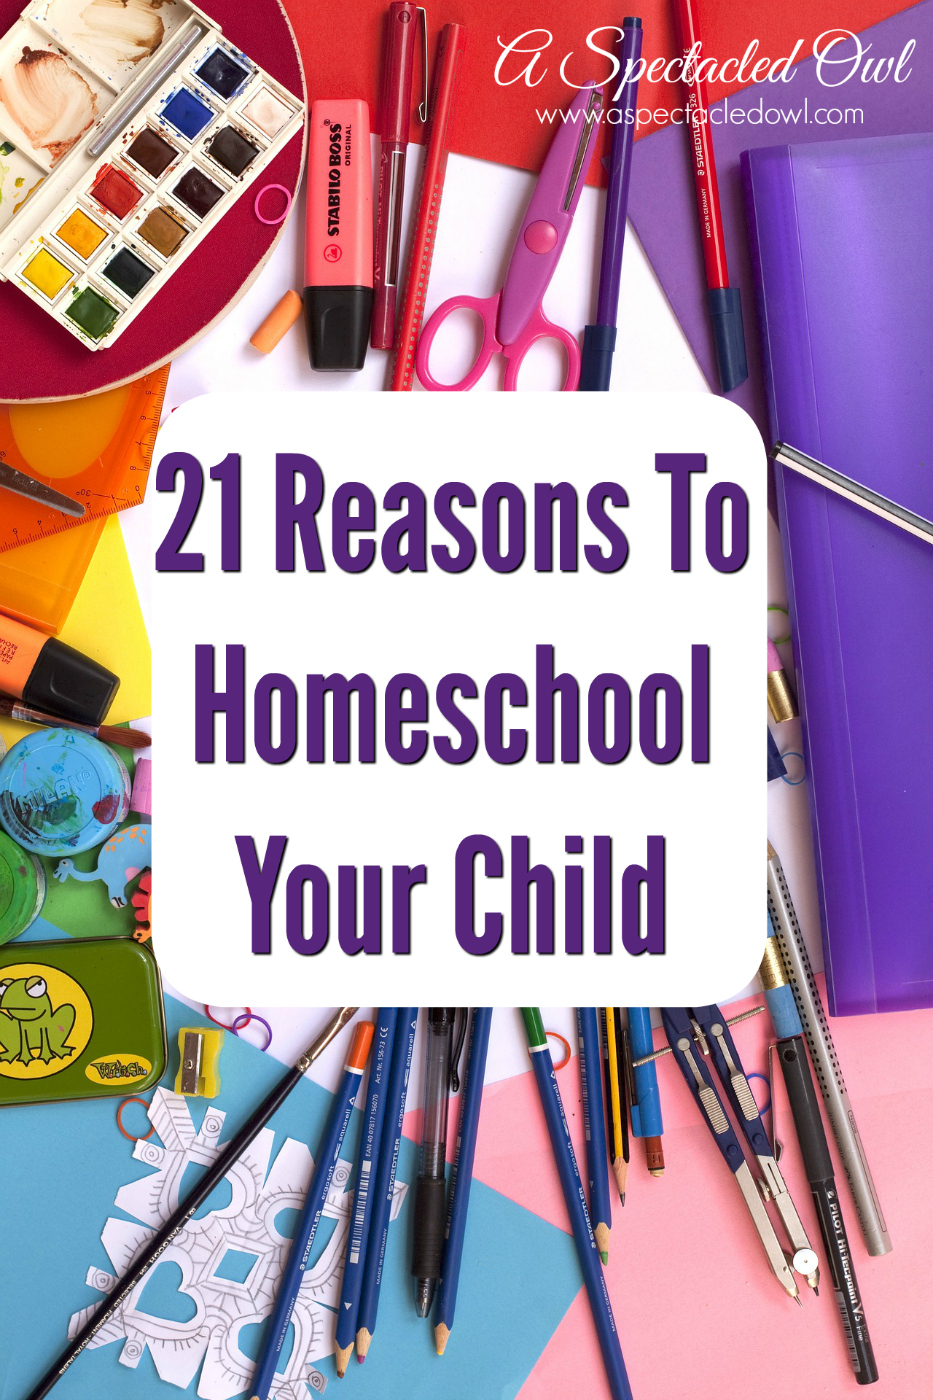 21 Reasons To Homeschool Your Child - Education can be a tricky subject to navigate, but these reasons to homeschool your child are a great example of the many benefits there are to homeschooling. 